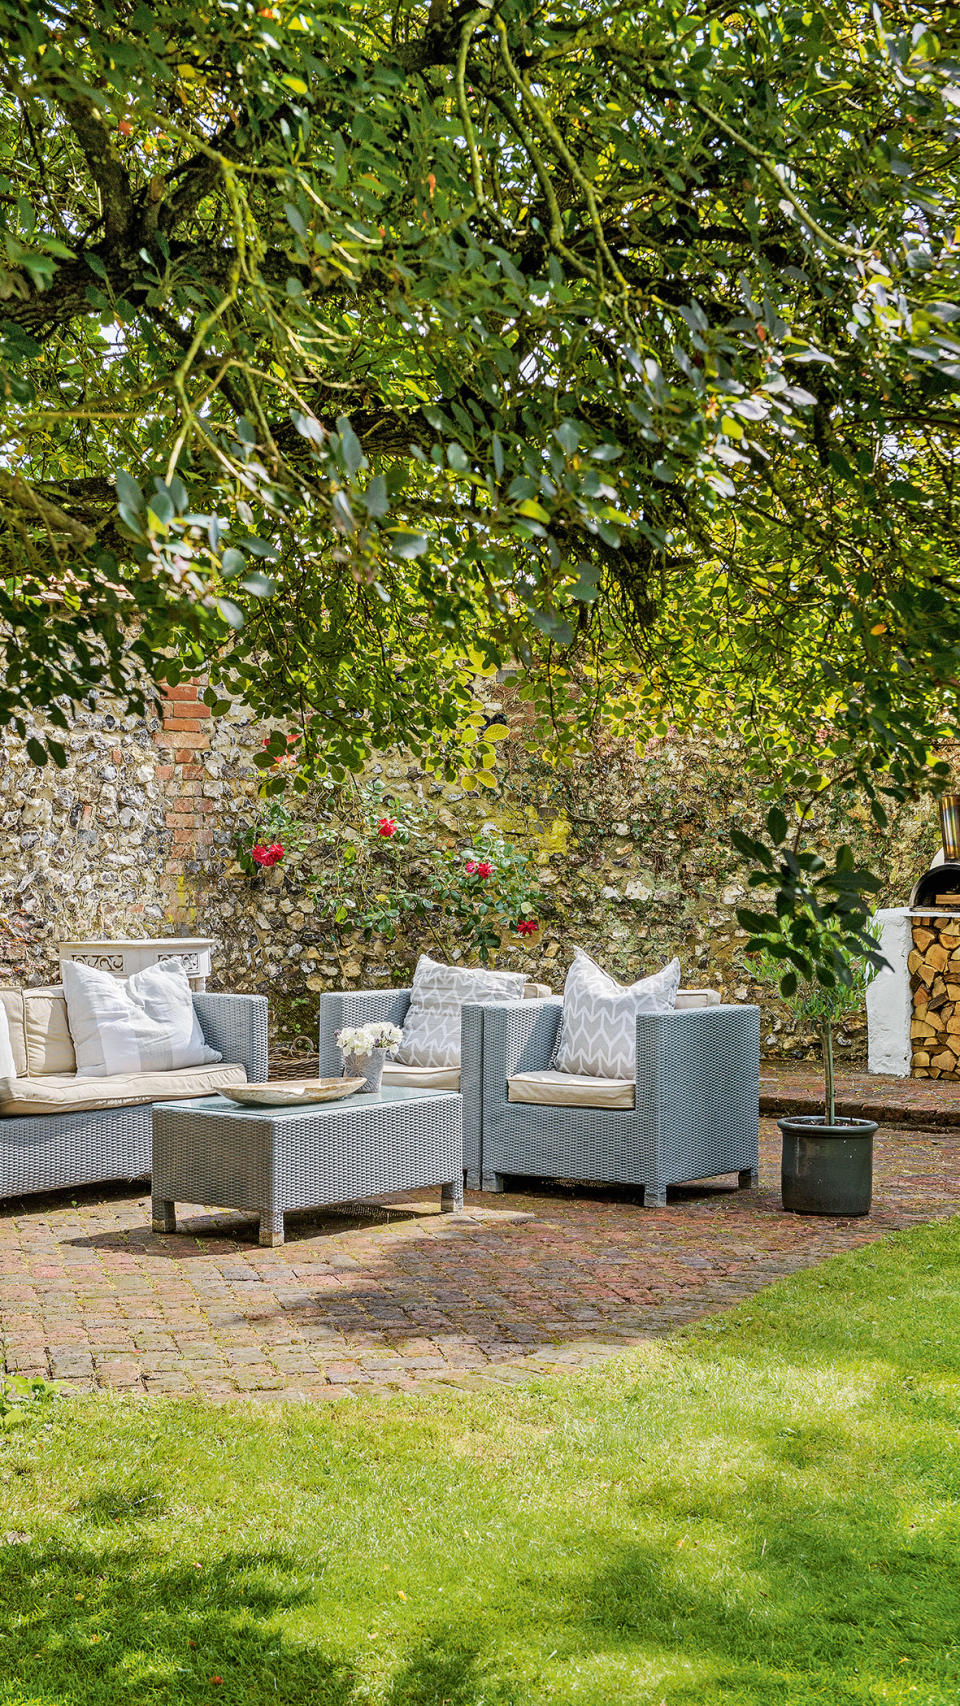 <p> Robust, traditional materials like timber, stone and brick lend themselves to a more rustic style garden. A pretty pastel outdoor sofa and chairs can set the scene and a climbing rose is classic cottage garden essential. Choose a fragrant climber and train it up a wall for quintessential country garden look.  </p>